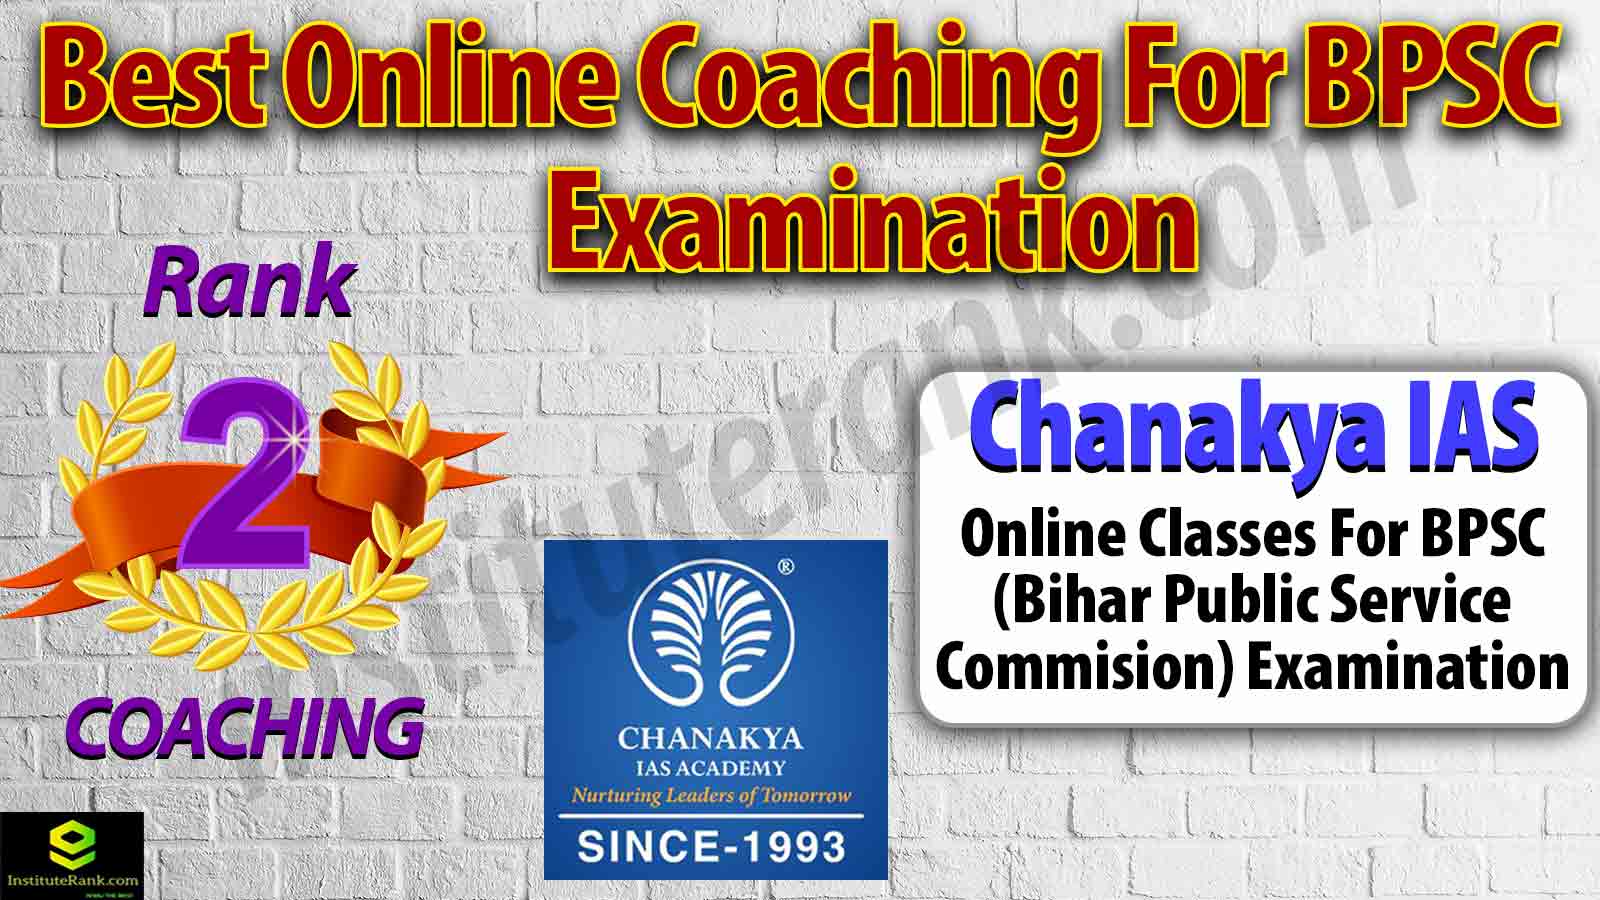 Best Online Coaching Preparation for BPSC Examination